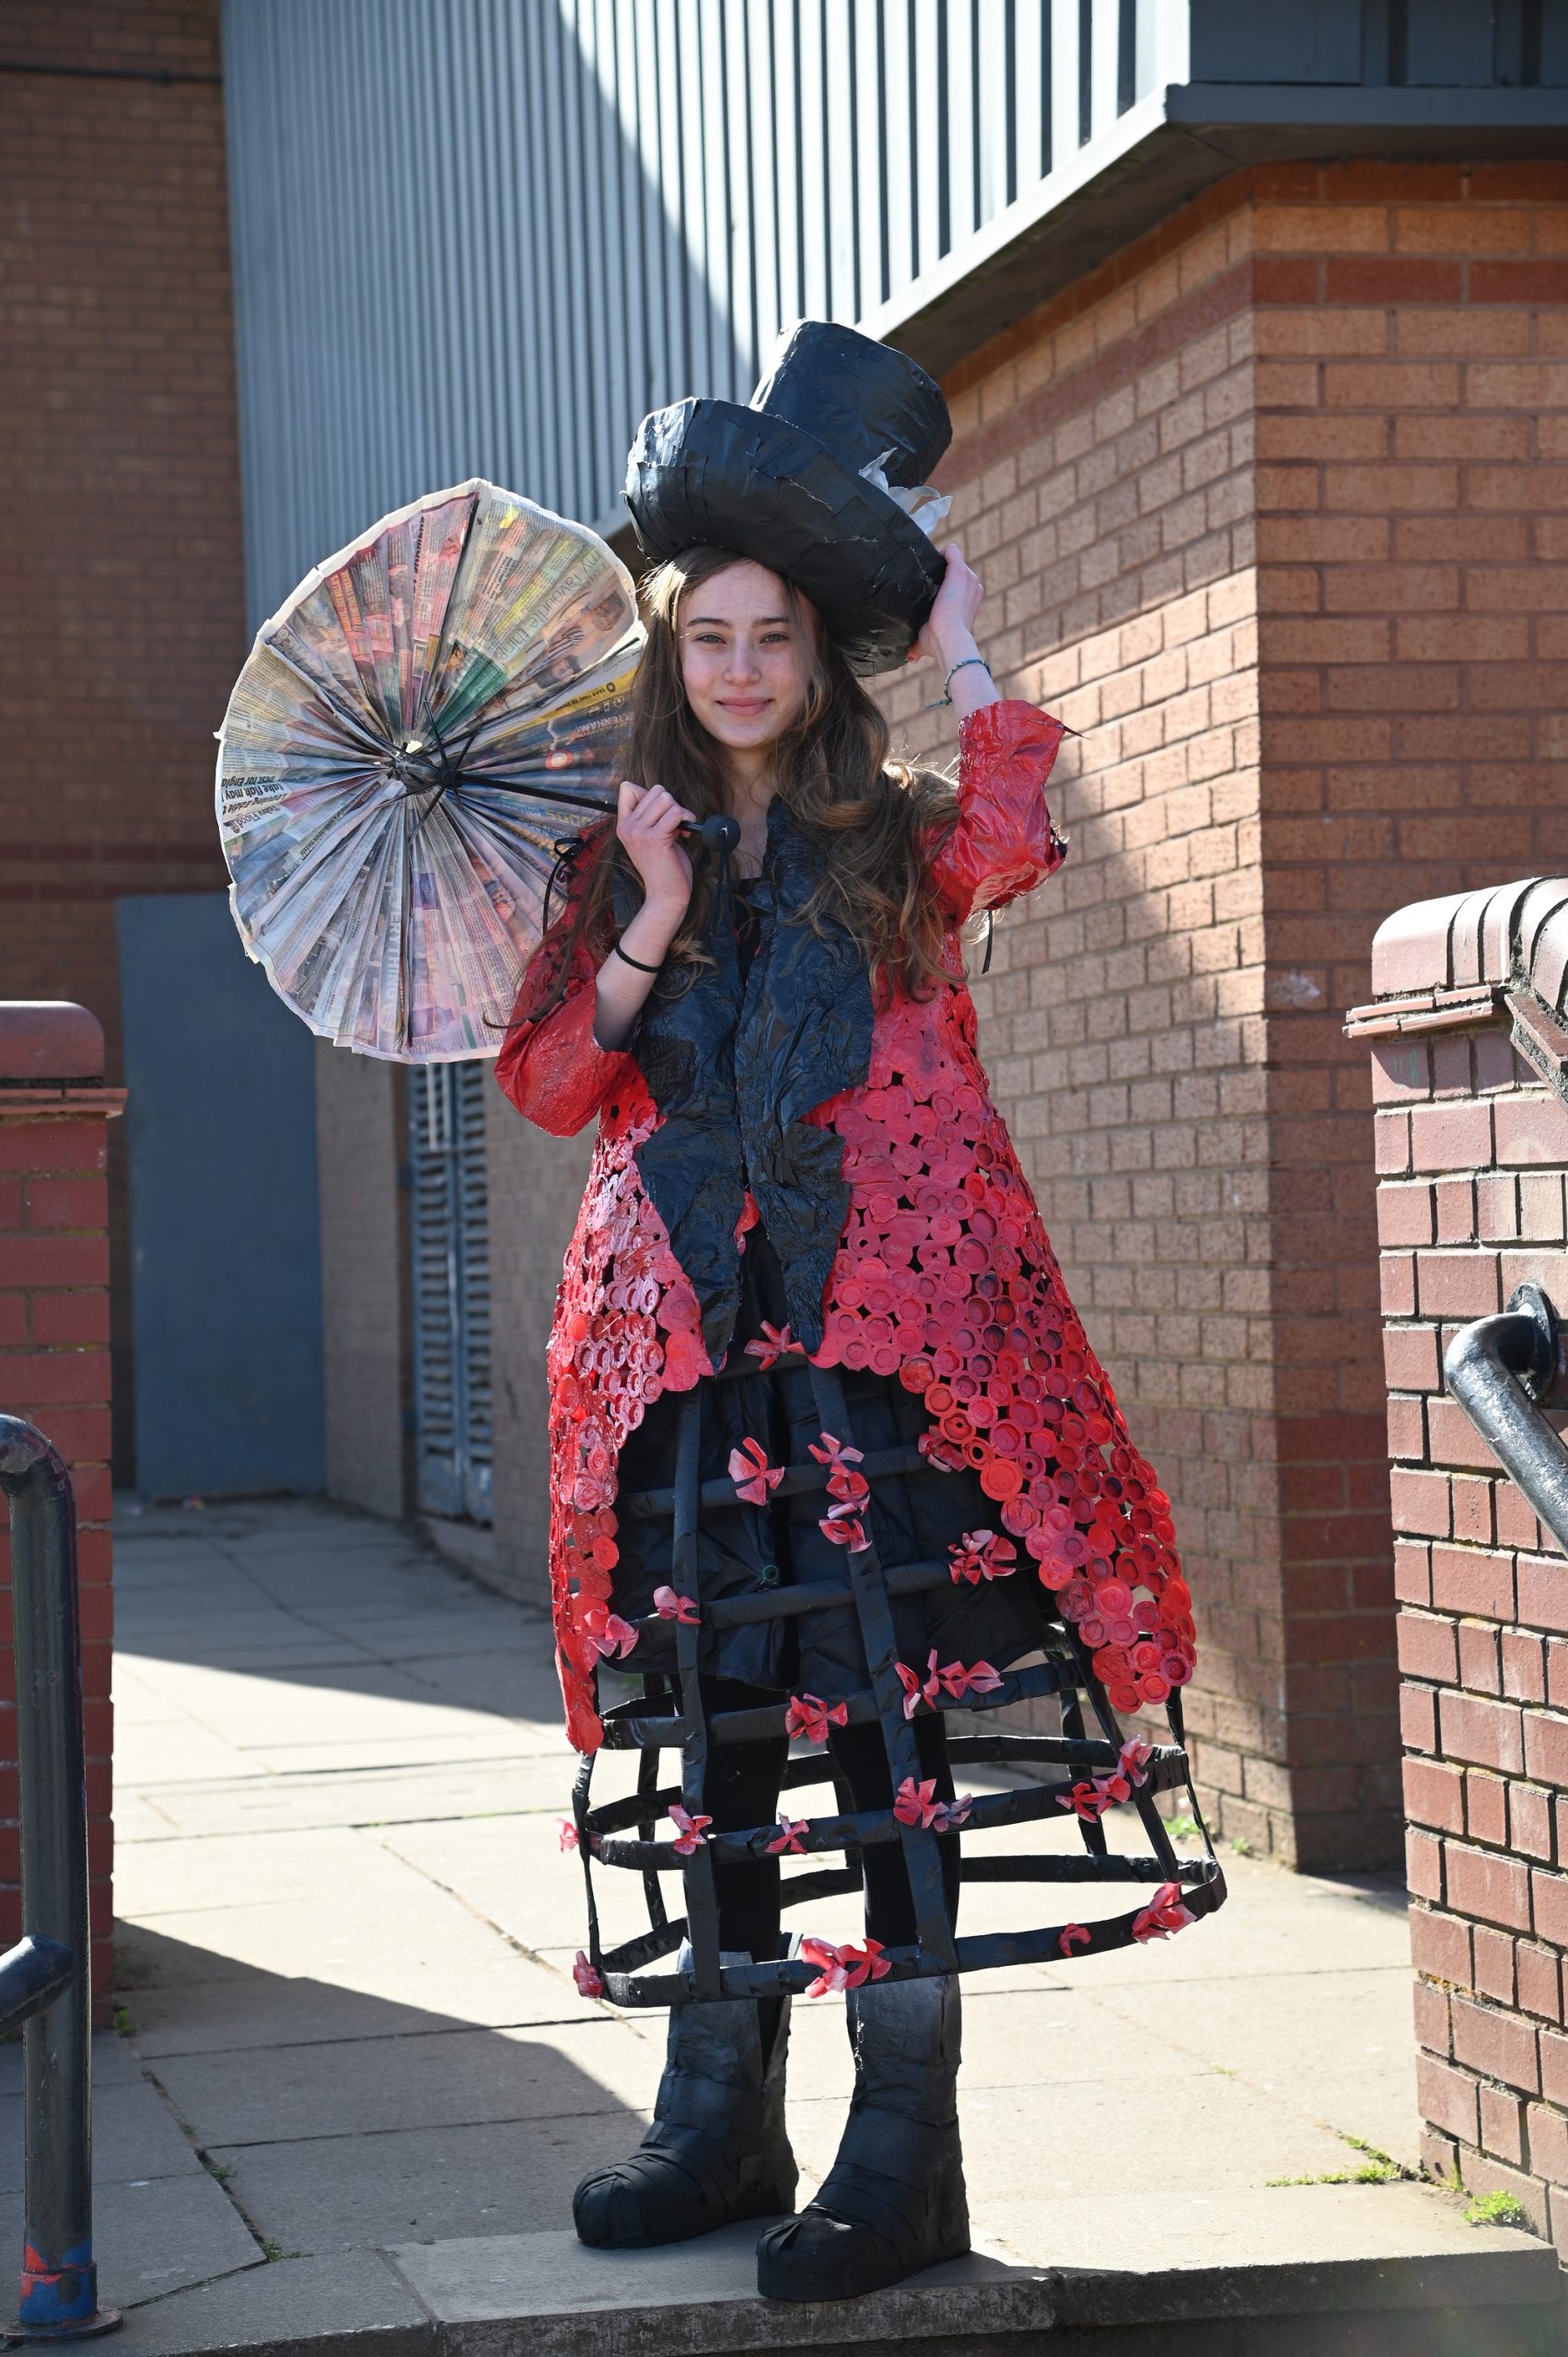 Giuliana with her Junk Kouture creation. Hat, dress, umbrella and shoes are all made out of waste.